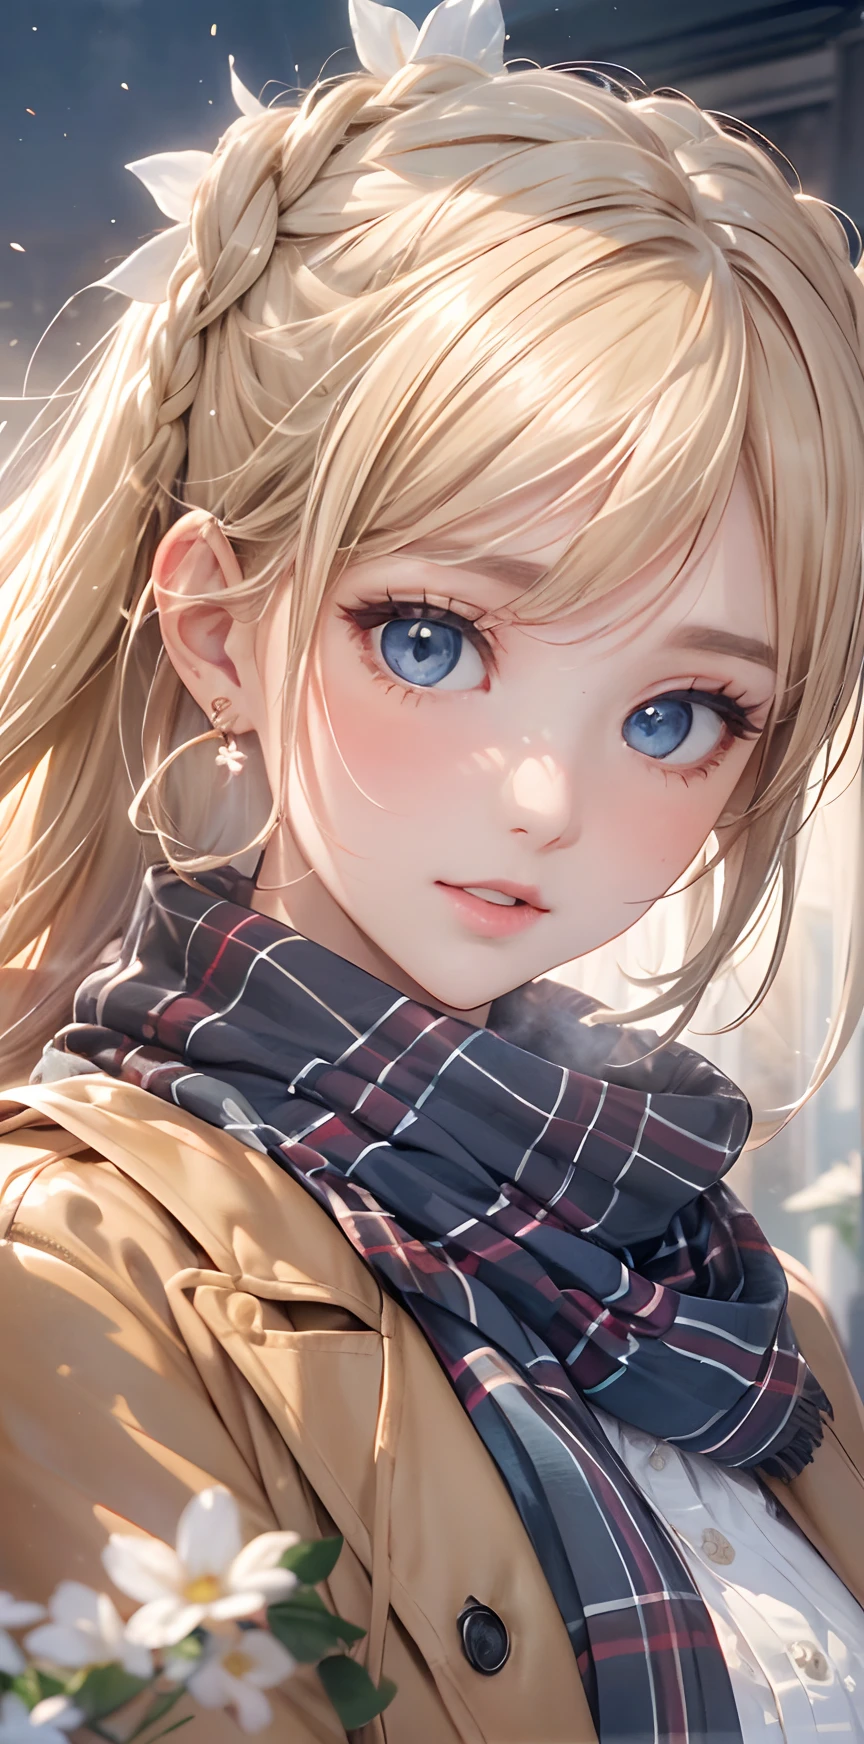 (​masterpiece),(top-quality:1.2),1girl in,(masuter piece:1.3),exquisitedetails, Highest quality 8K resolution, Ultra-detailed, Realistic, Vibrant colors, Soft tones, With warm and gentle lighting,(Beautiful plaid scarf:1.3),(Preet Pink Ruffled Ribbon Dress,) (Brown long coat:1.2) early evening,Big sunset,(Smooth straight blonde hair:1.2),(Hair parted in the middle:1.3),(Glowing hair),(Dark blue eyes:1.3),White skin, hair clips,Overflowing soft and gentle feelings,(The promenade is full of flowers),The sun's rays illuminate joy and pure love, Warm golden glow,The atmosphere is full of happiness and laughter, As if celebrating love,Sticking to ultra-detailed depictions and vivid colors. In a style that blends romanticism and realism、You can feel the depth of love,color palettes,Create an ethereal atmosphere like a dream,and the lighting is soft and diffused, Shine a gentle light on your face,The artwork is a masterpiece,